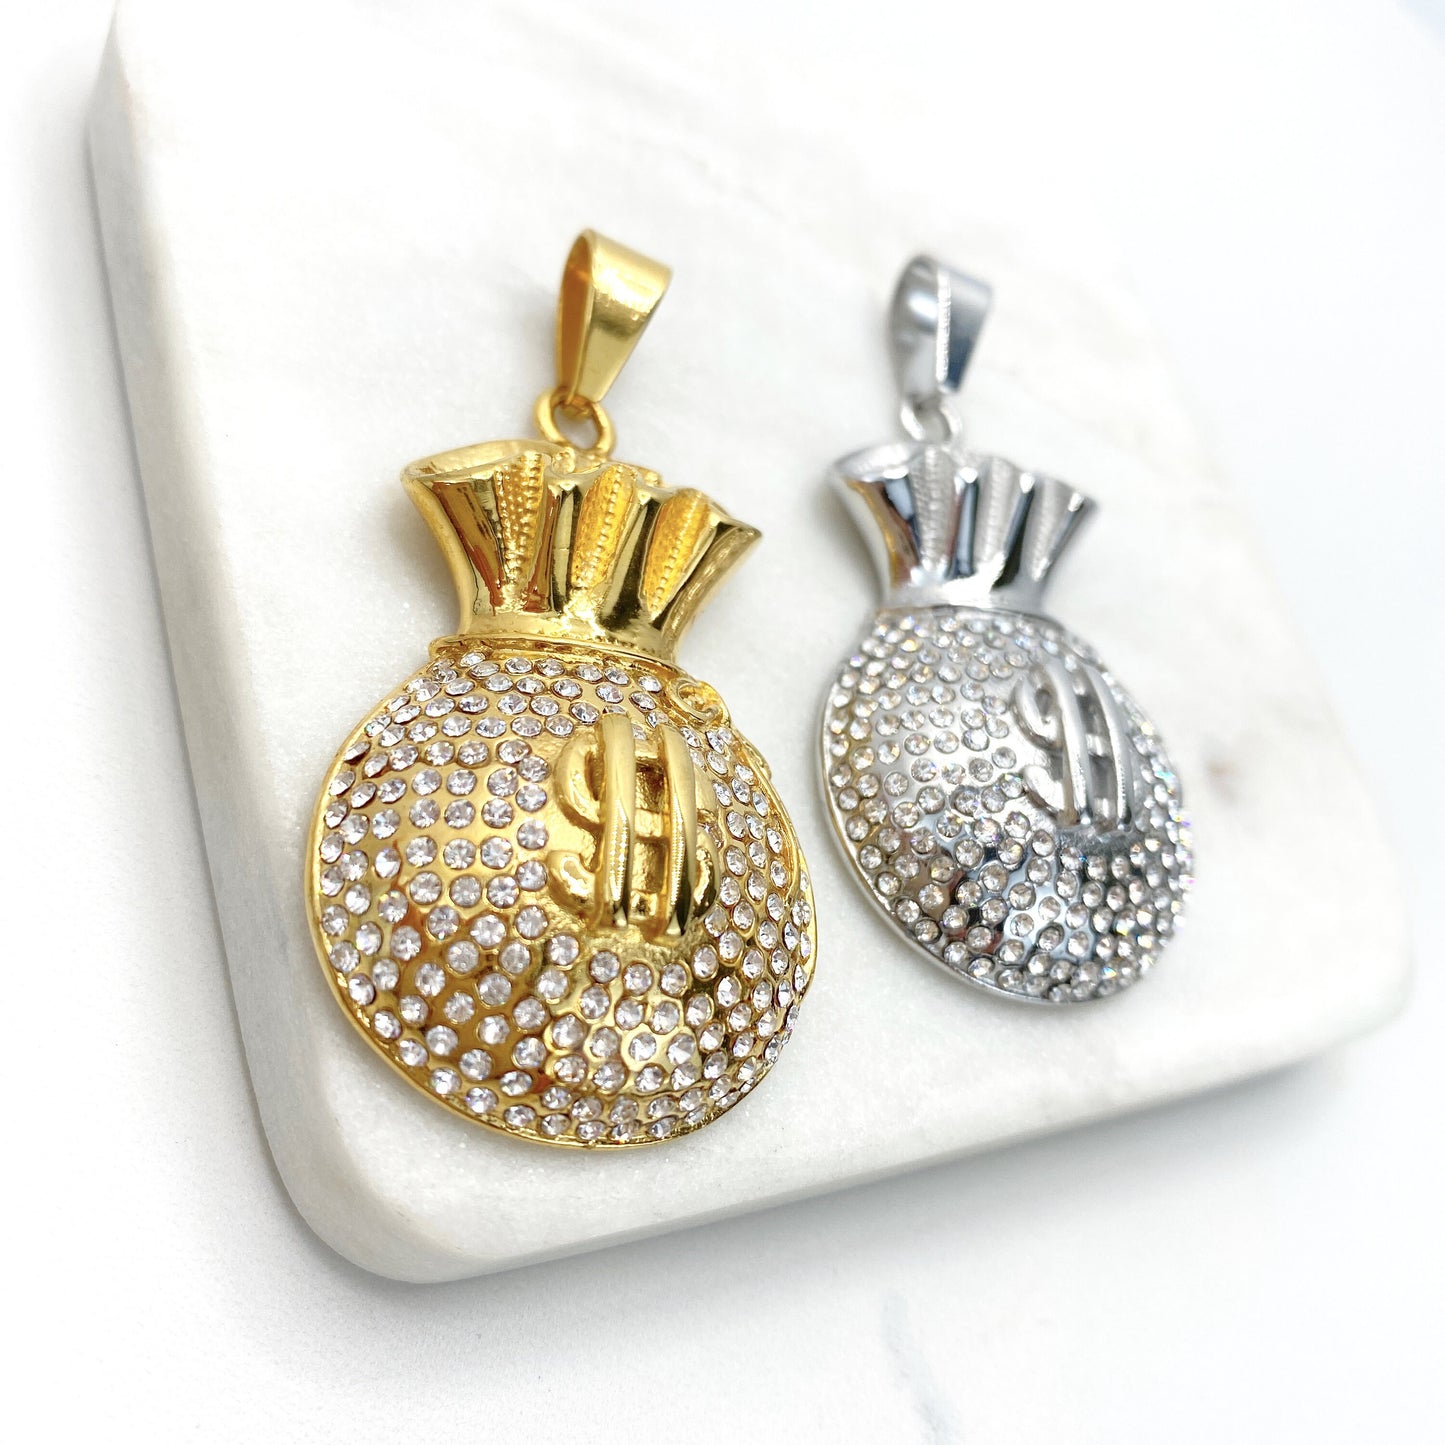 Stainless Steal, Cubic Zirconia ''Bag of Money'' Charms Pendant, Gold or Silver, Wholesale Jewelry Making Supplies